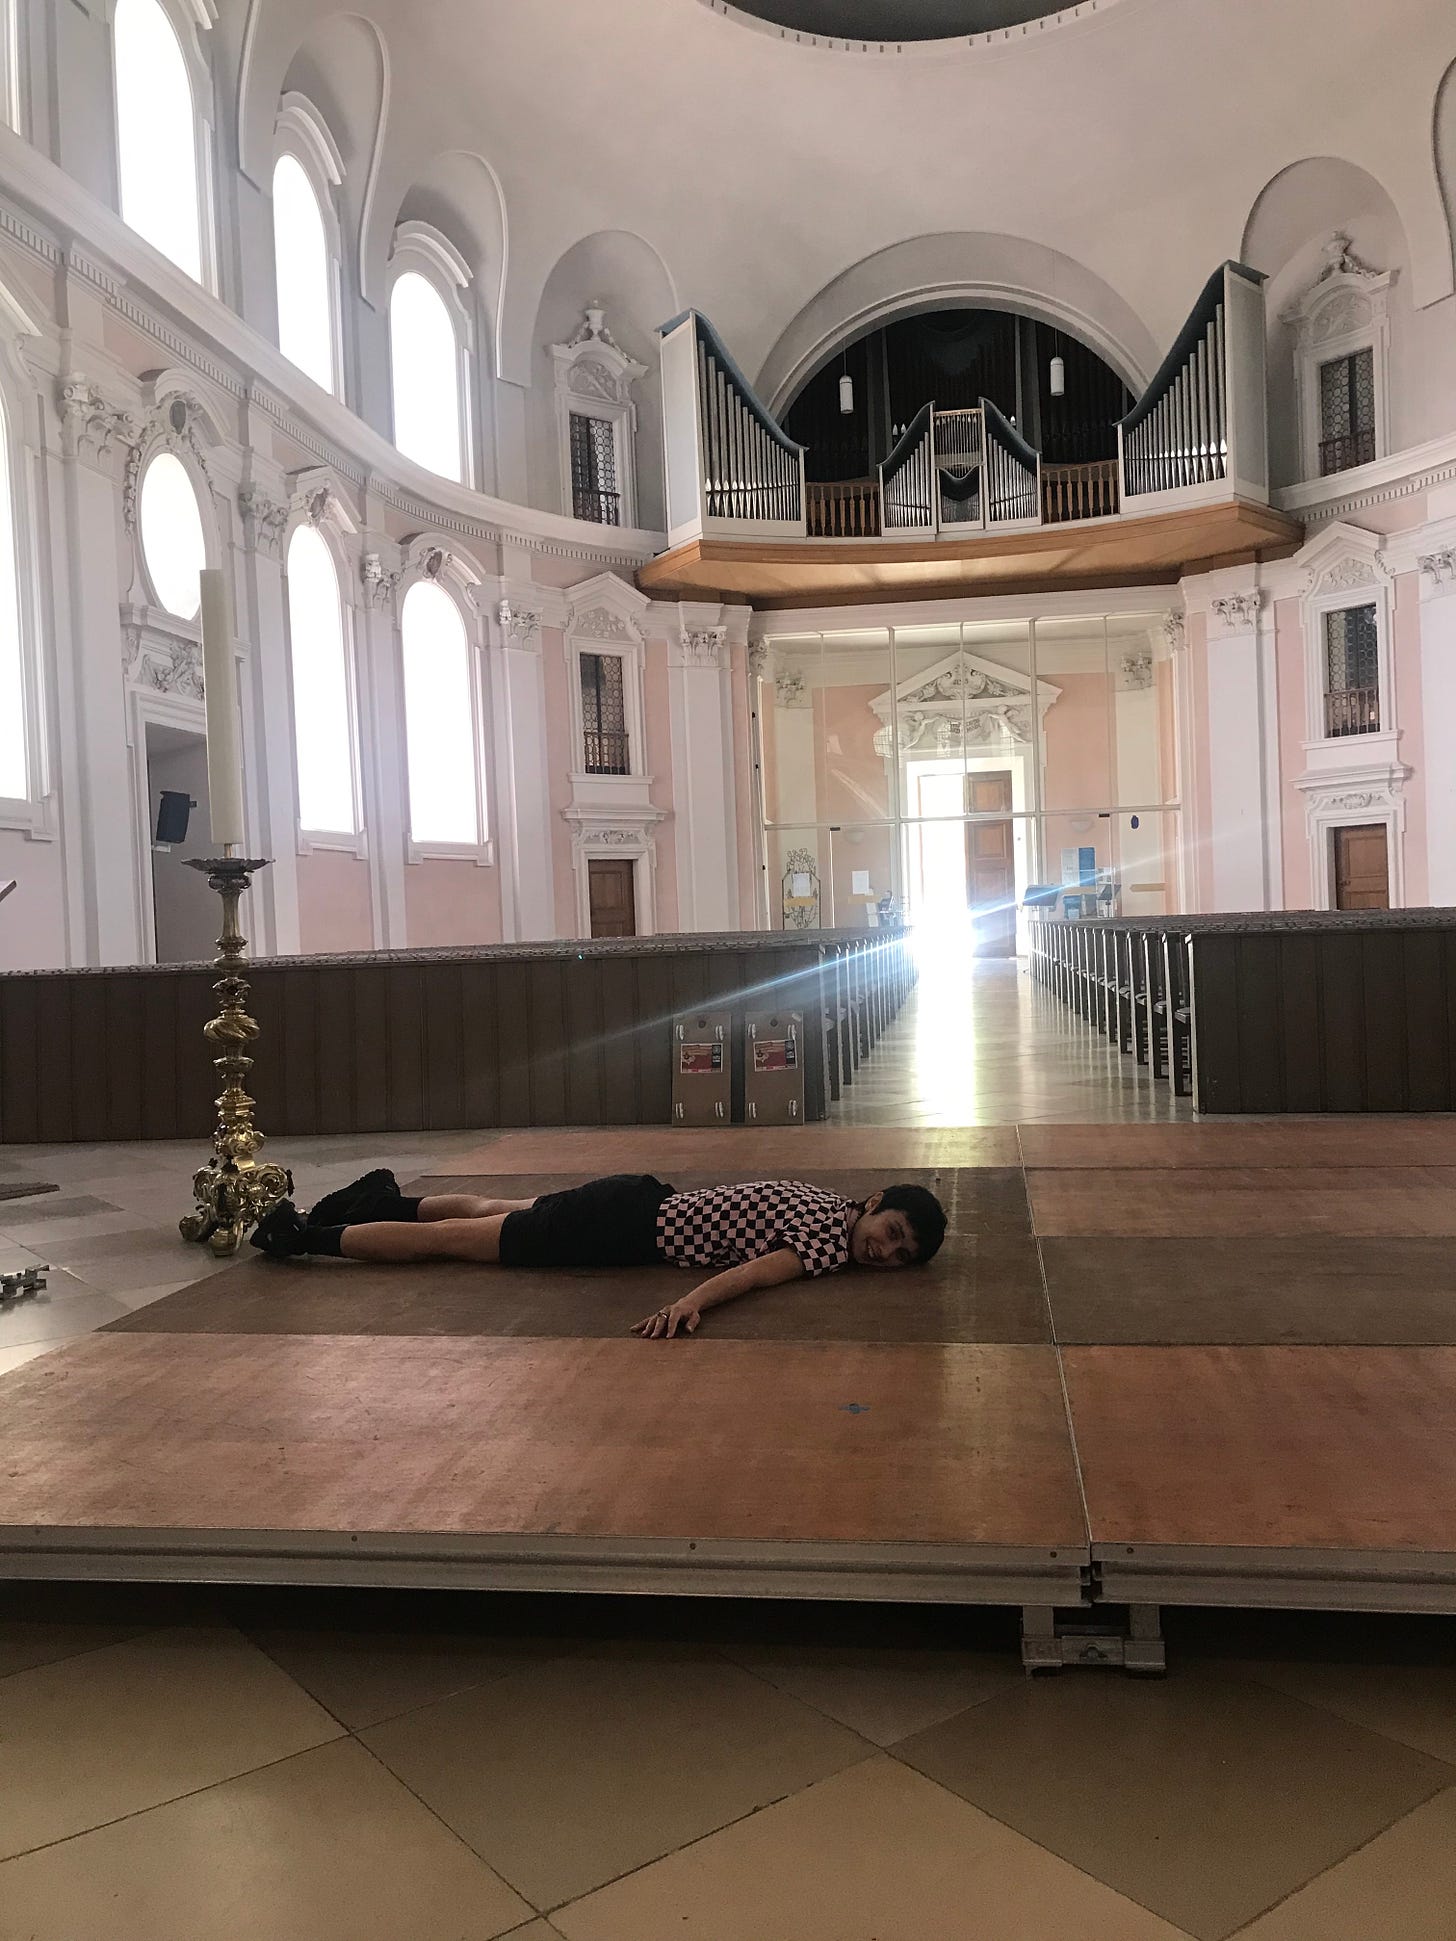 We are inside a big gothic church with pink walls. There is light streaming through the door in the back of the frame. Nikima is lying face down on the dance floor by the altar, smiling and looking at me.